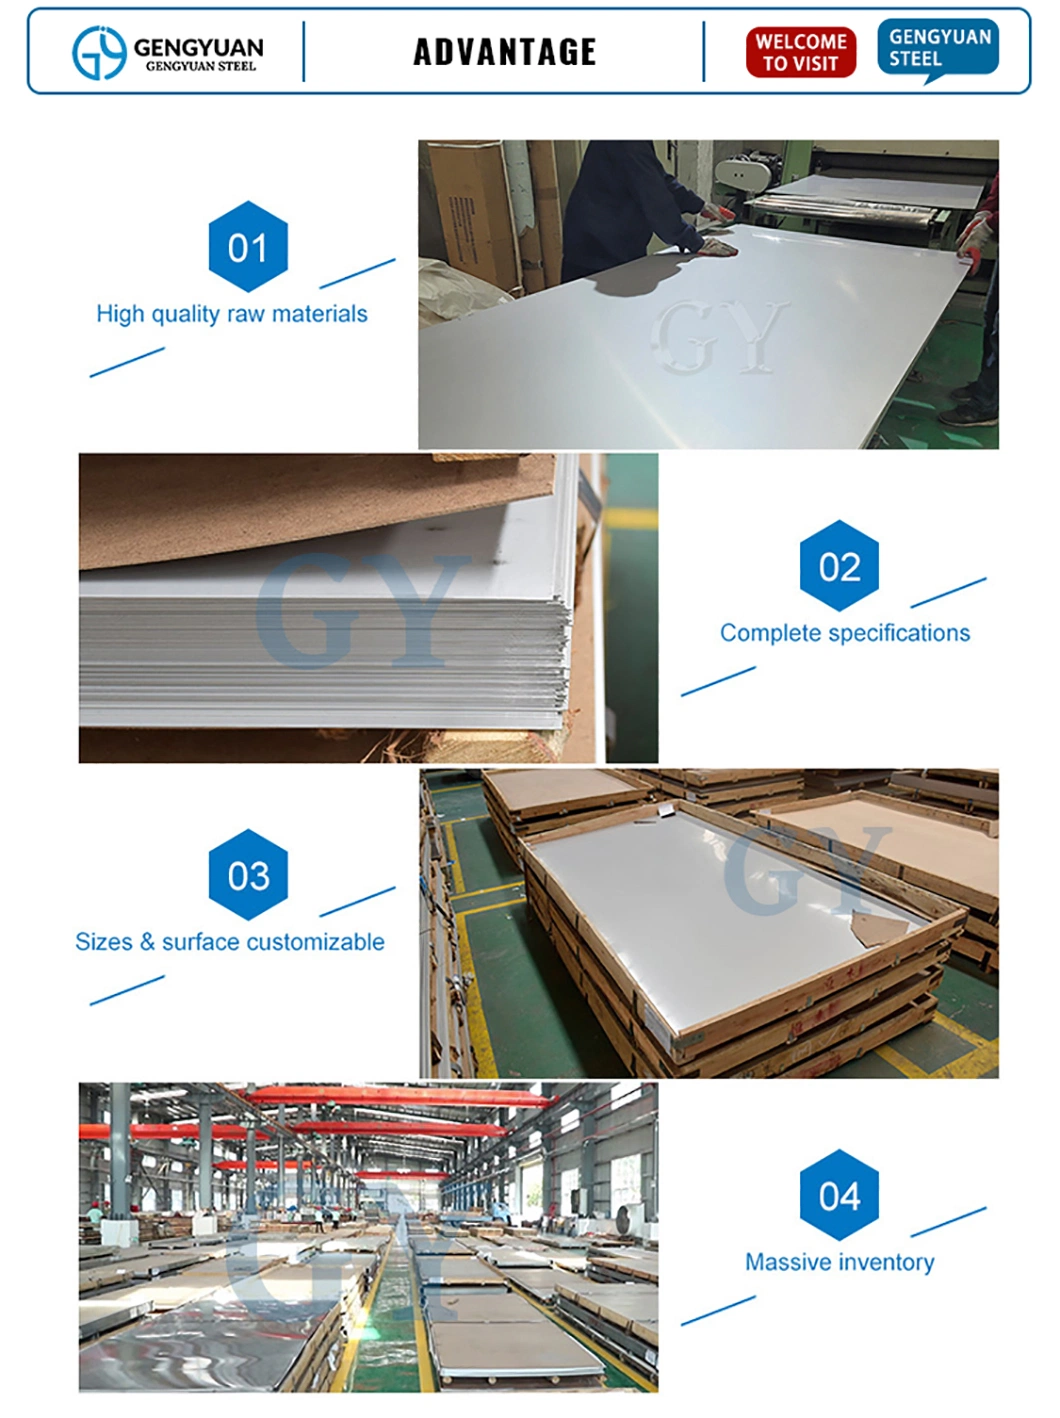 No. 1 2b 8K Ba Hl No. 4 Surface Perforated 201 202 304 304L 316 316L 309 310 410 420 430 904L 2205 2507 Finished Stainless Steel Sheet